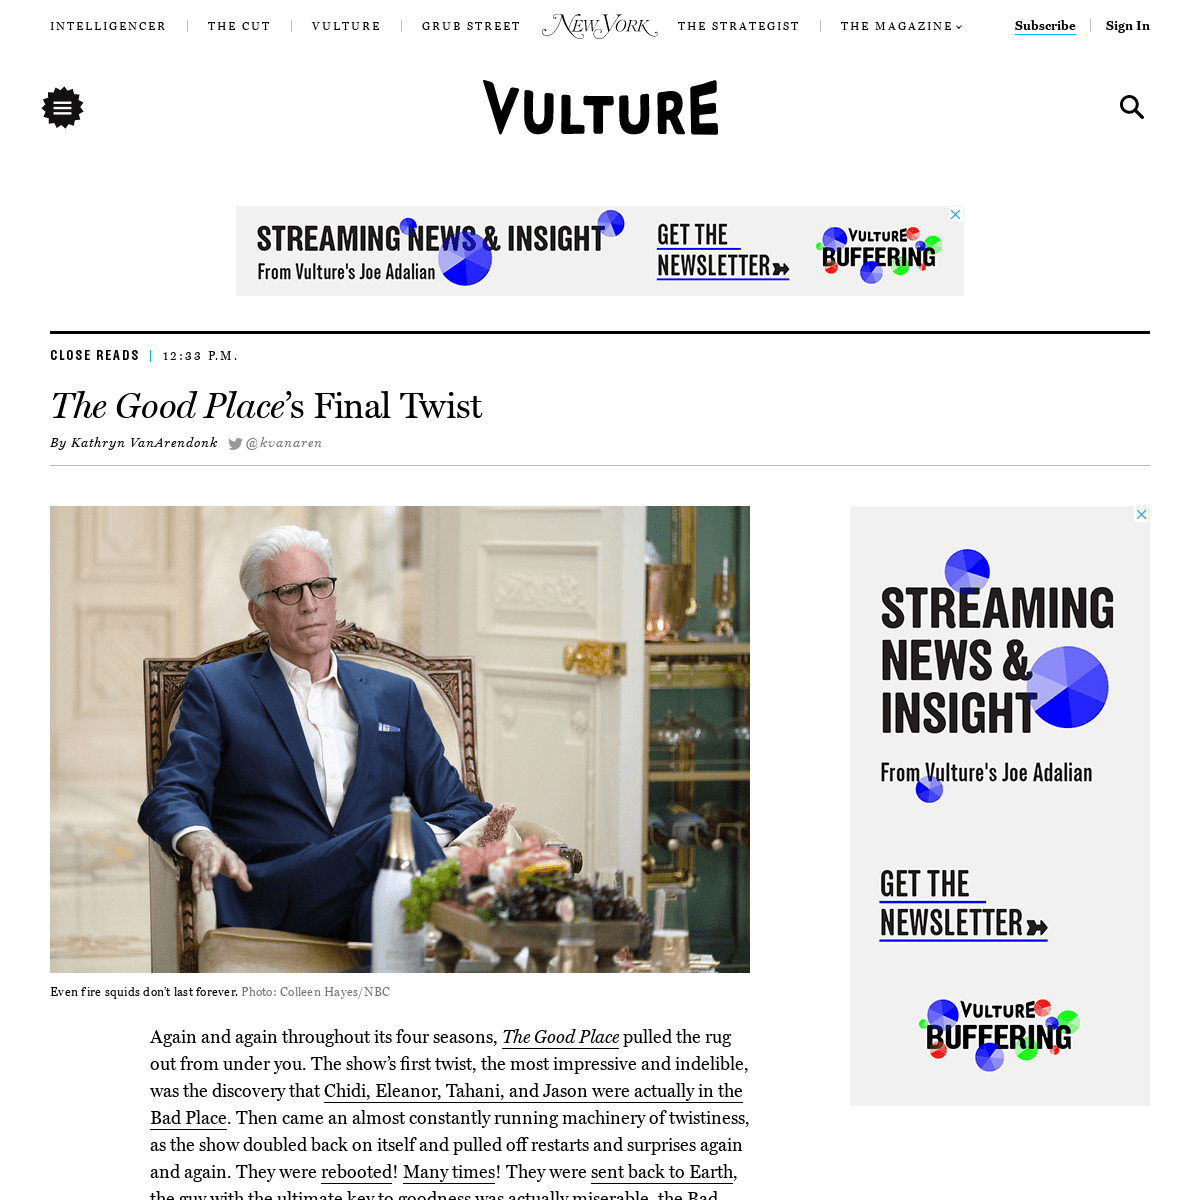 A complete backup of www.vulture.com/2020/01/the-good-place-finale-ending.html